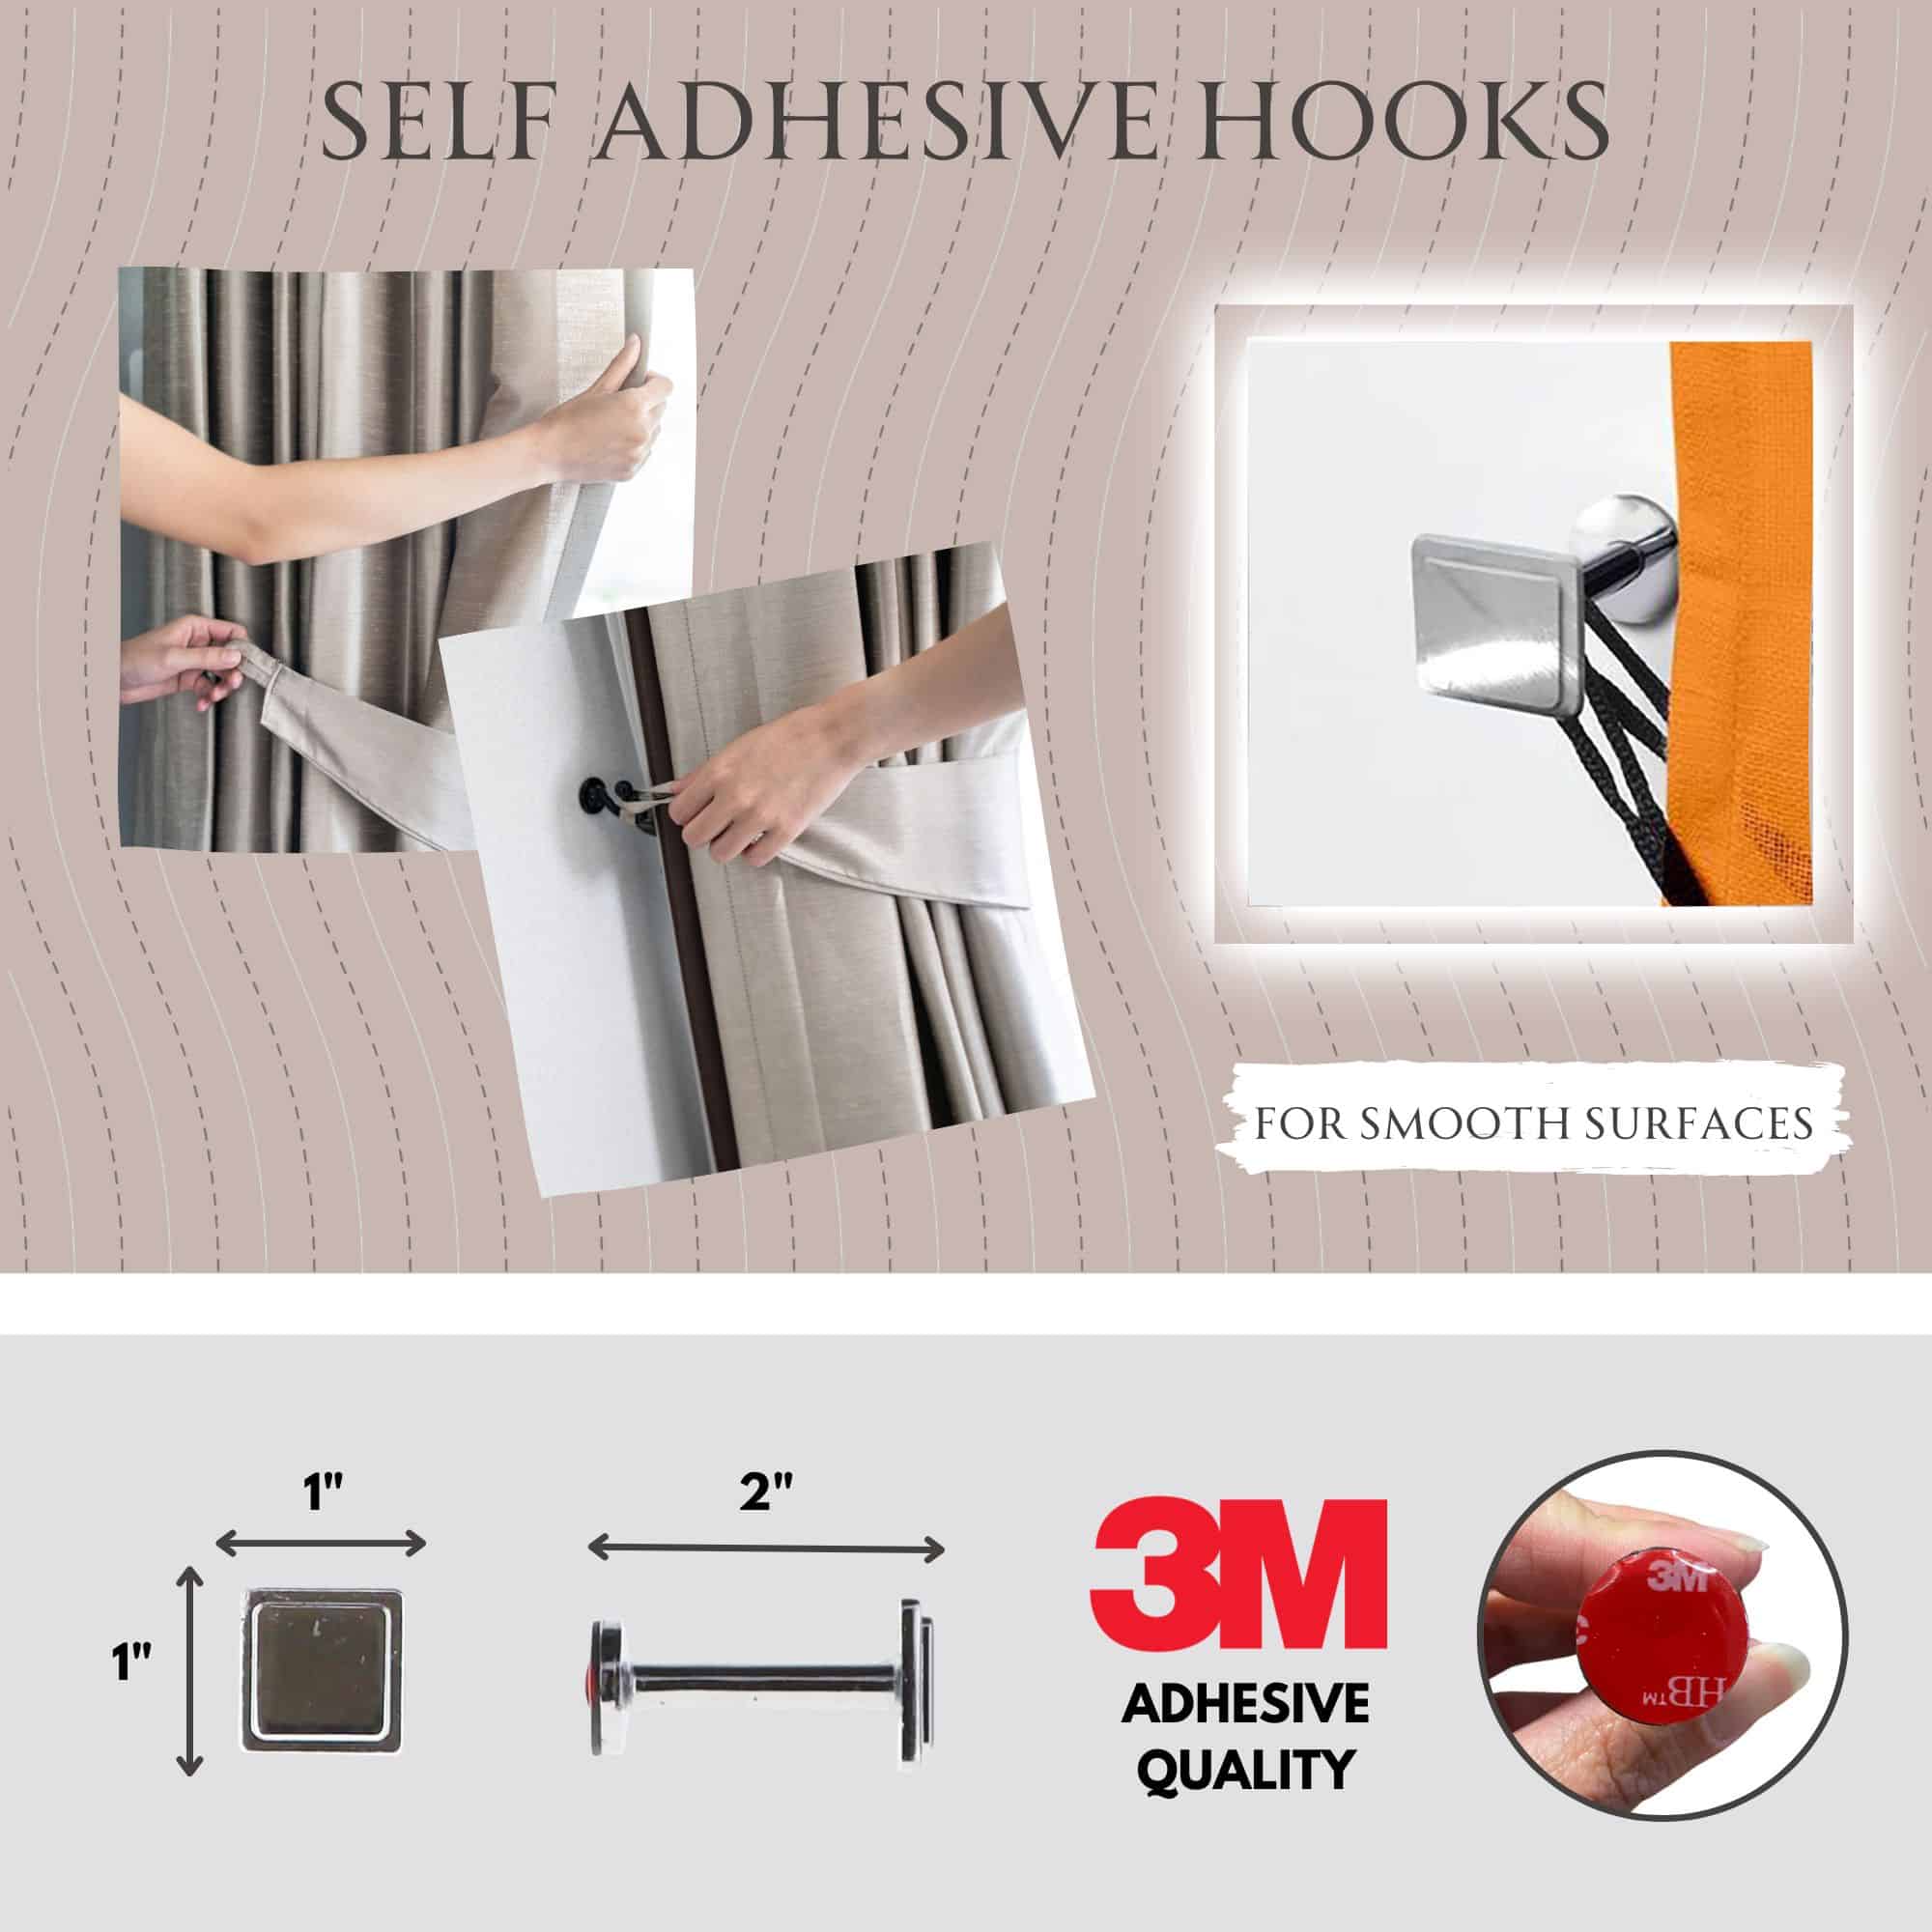 self adhesive hooks x 2 for smooth surfaces with 3M adhesive quality